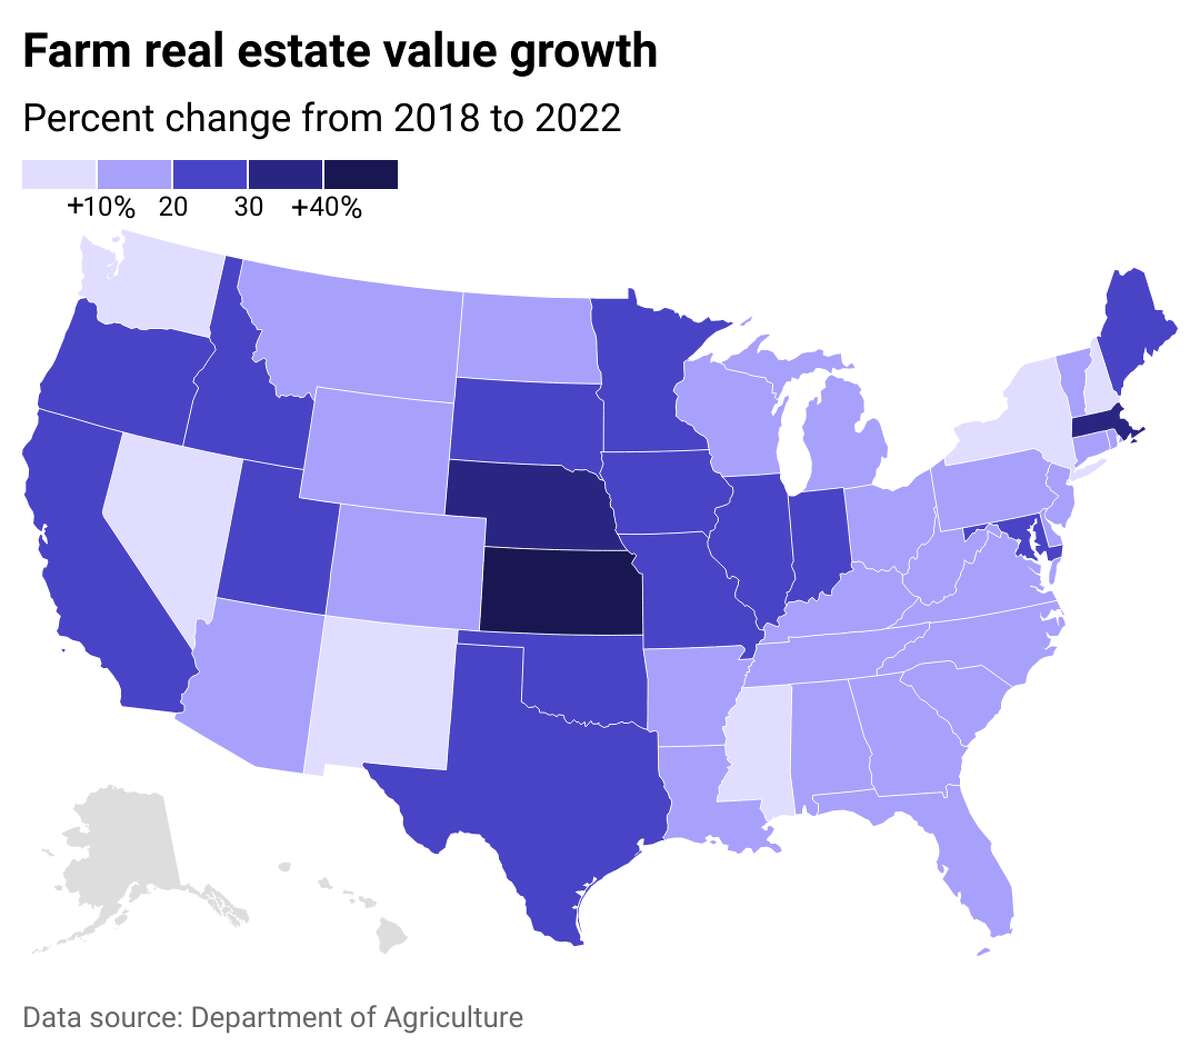 States with the largest farm land price growth The biggest surge in farmland values has happened in the states that comprise the American Midwest or the Plains states. Farmland values in the Northern Plains states recorded the biggest growth from 2018 to 2022, rising more than 30%. In parts of America's heartland, loans for farmland carried historically below-average interest rates from 2015 to 2019. Interest rates remained low through the initial years of the pandemic and began increasing in spring 2022—and demand for loans fell steadily for much of the year. In Oklahoma, bankers surveyed by the Federal Reserve said much of the demand for farmland was driven by marijuana growers—a booming industry that only recently became legal in the state. In Kansas, one banker pointed to COVID-19-related bailout programs and safety nets for agricultural producers as "beyond any I have seen in my ag banking experience of over 40 years and resulted in massive appreciation in farm assets."